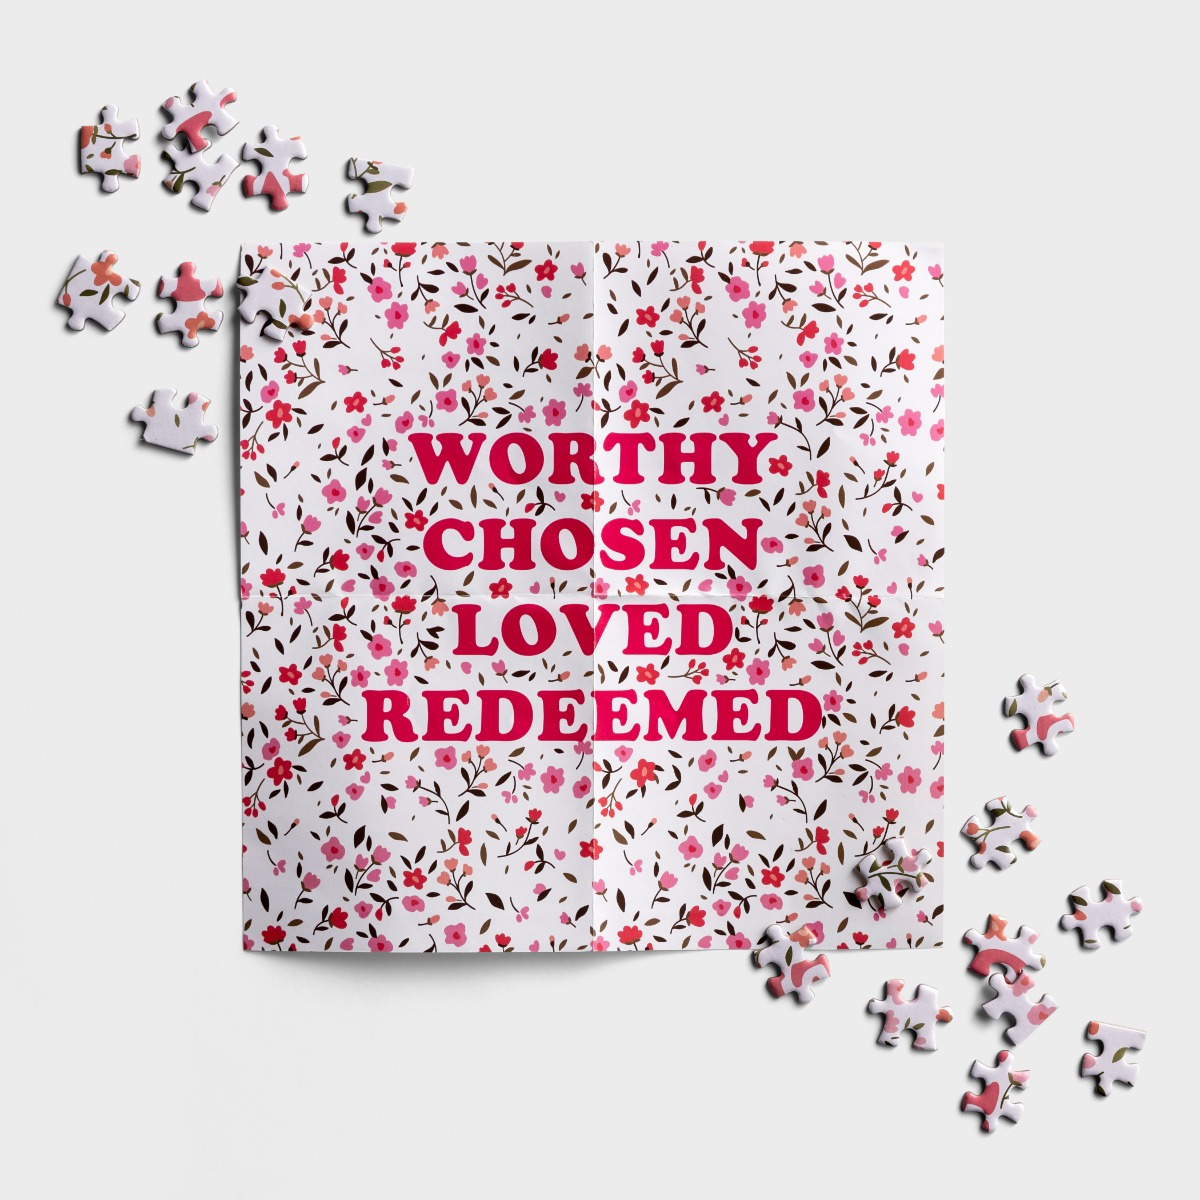 Worthy Chosen Loved Redeemed - Inspirational Jigsaw Puzzle - 250 Pieces